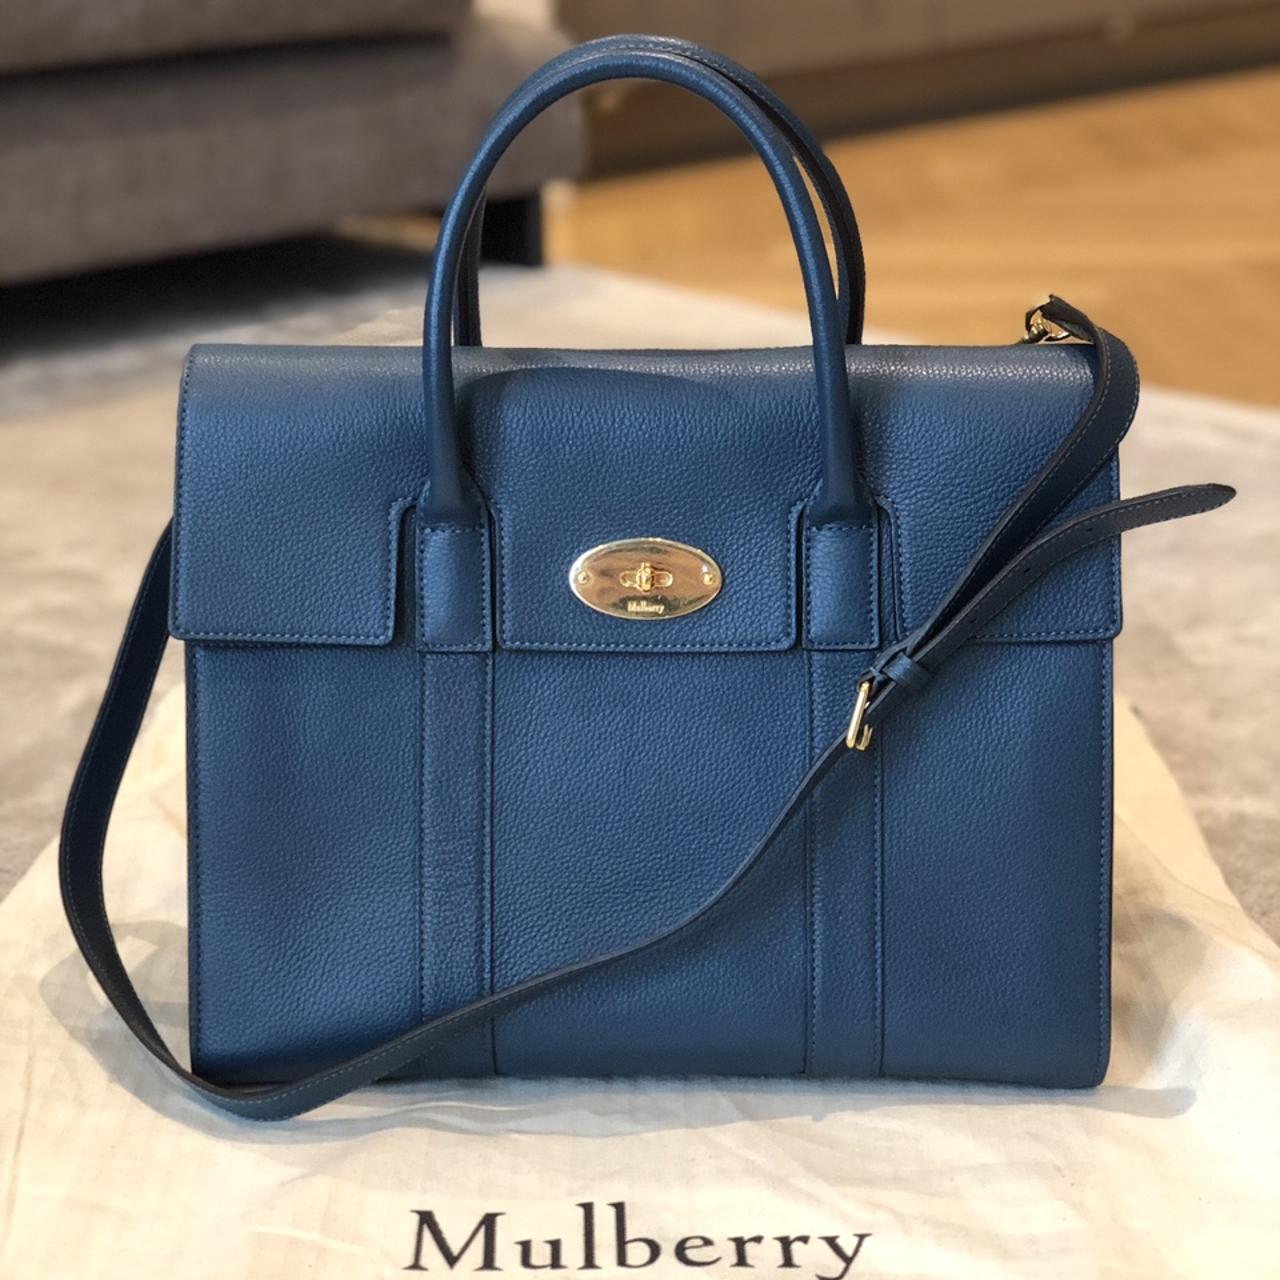 Mulberry Bayswater Small Classic Grain Leather... - Depop